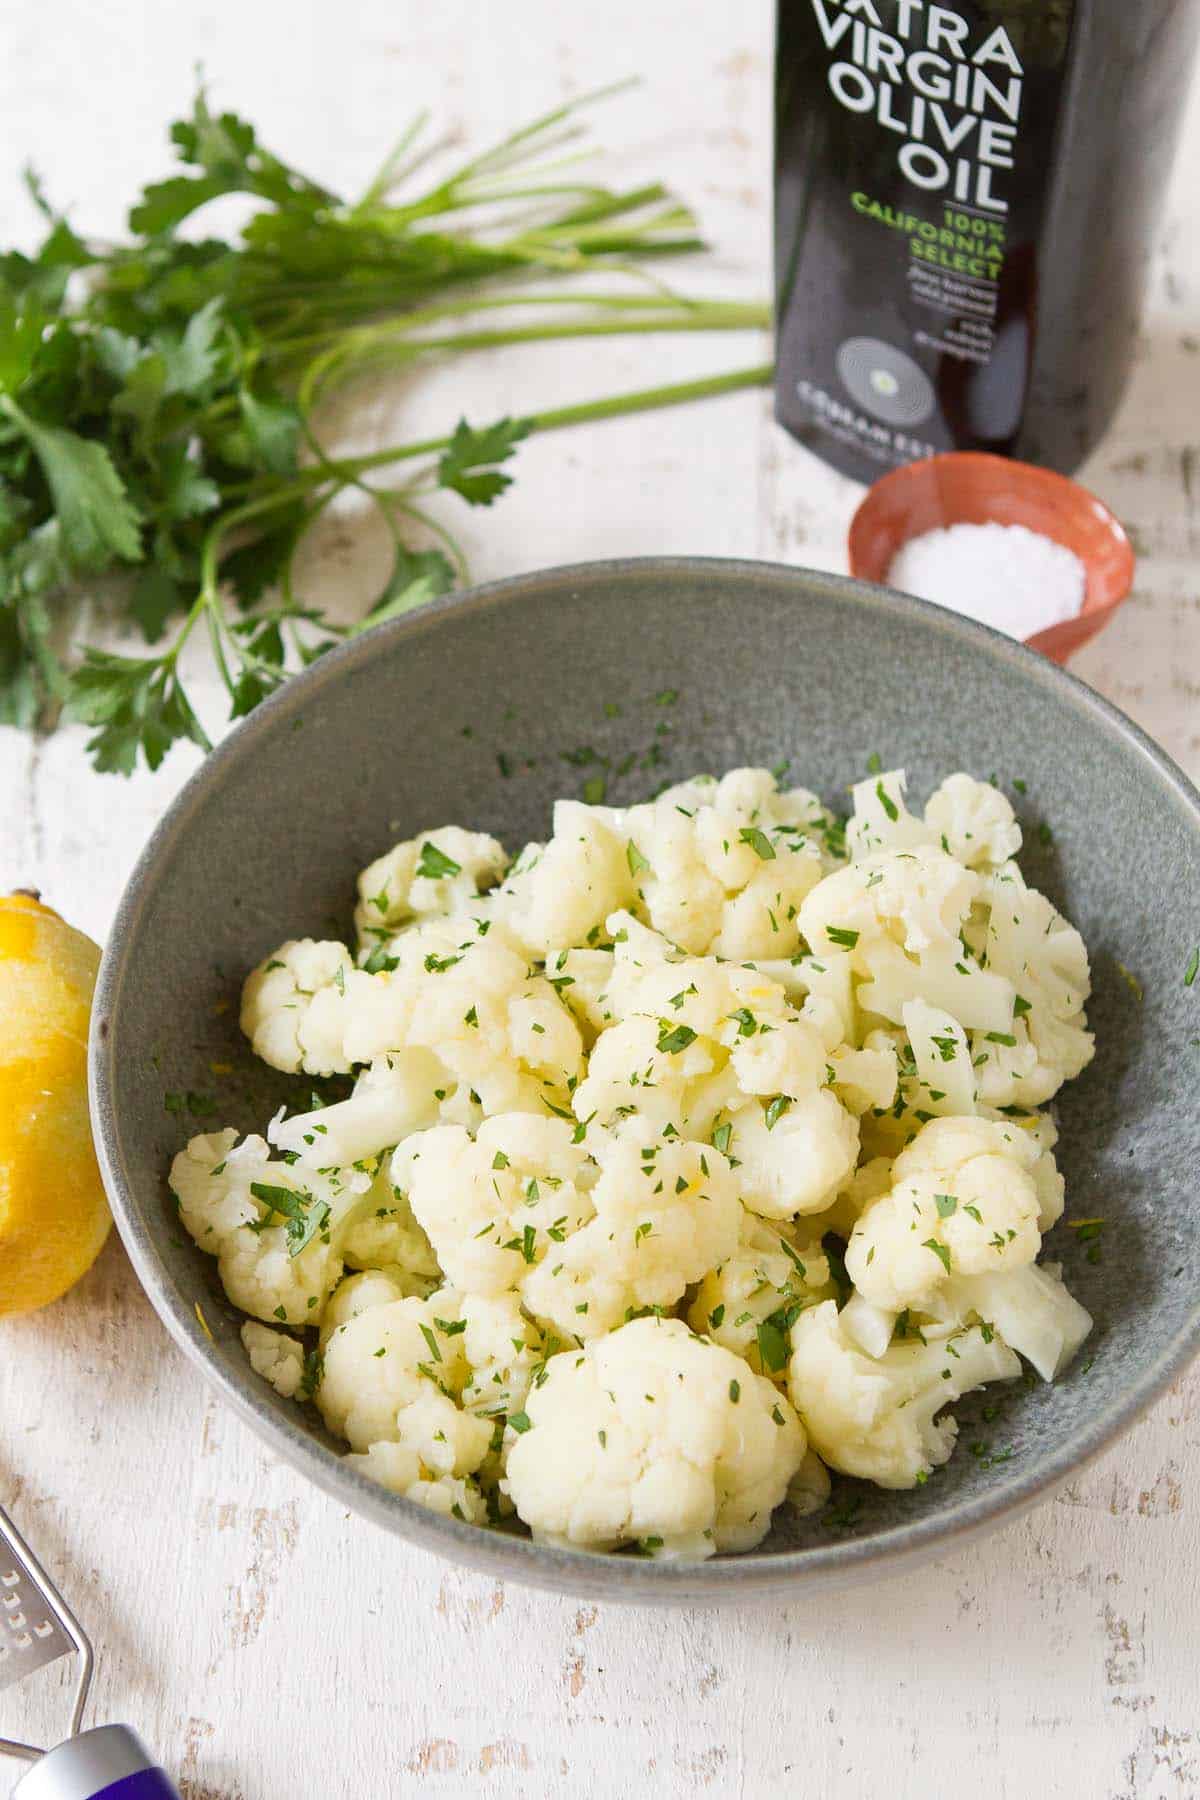 Steamed cauliflower in a gray bowl, with parsley and lemon behind.